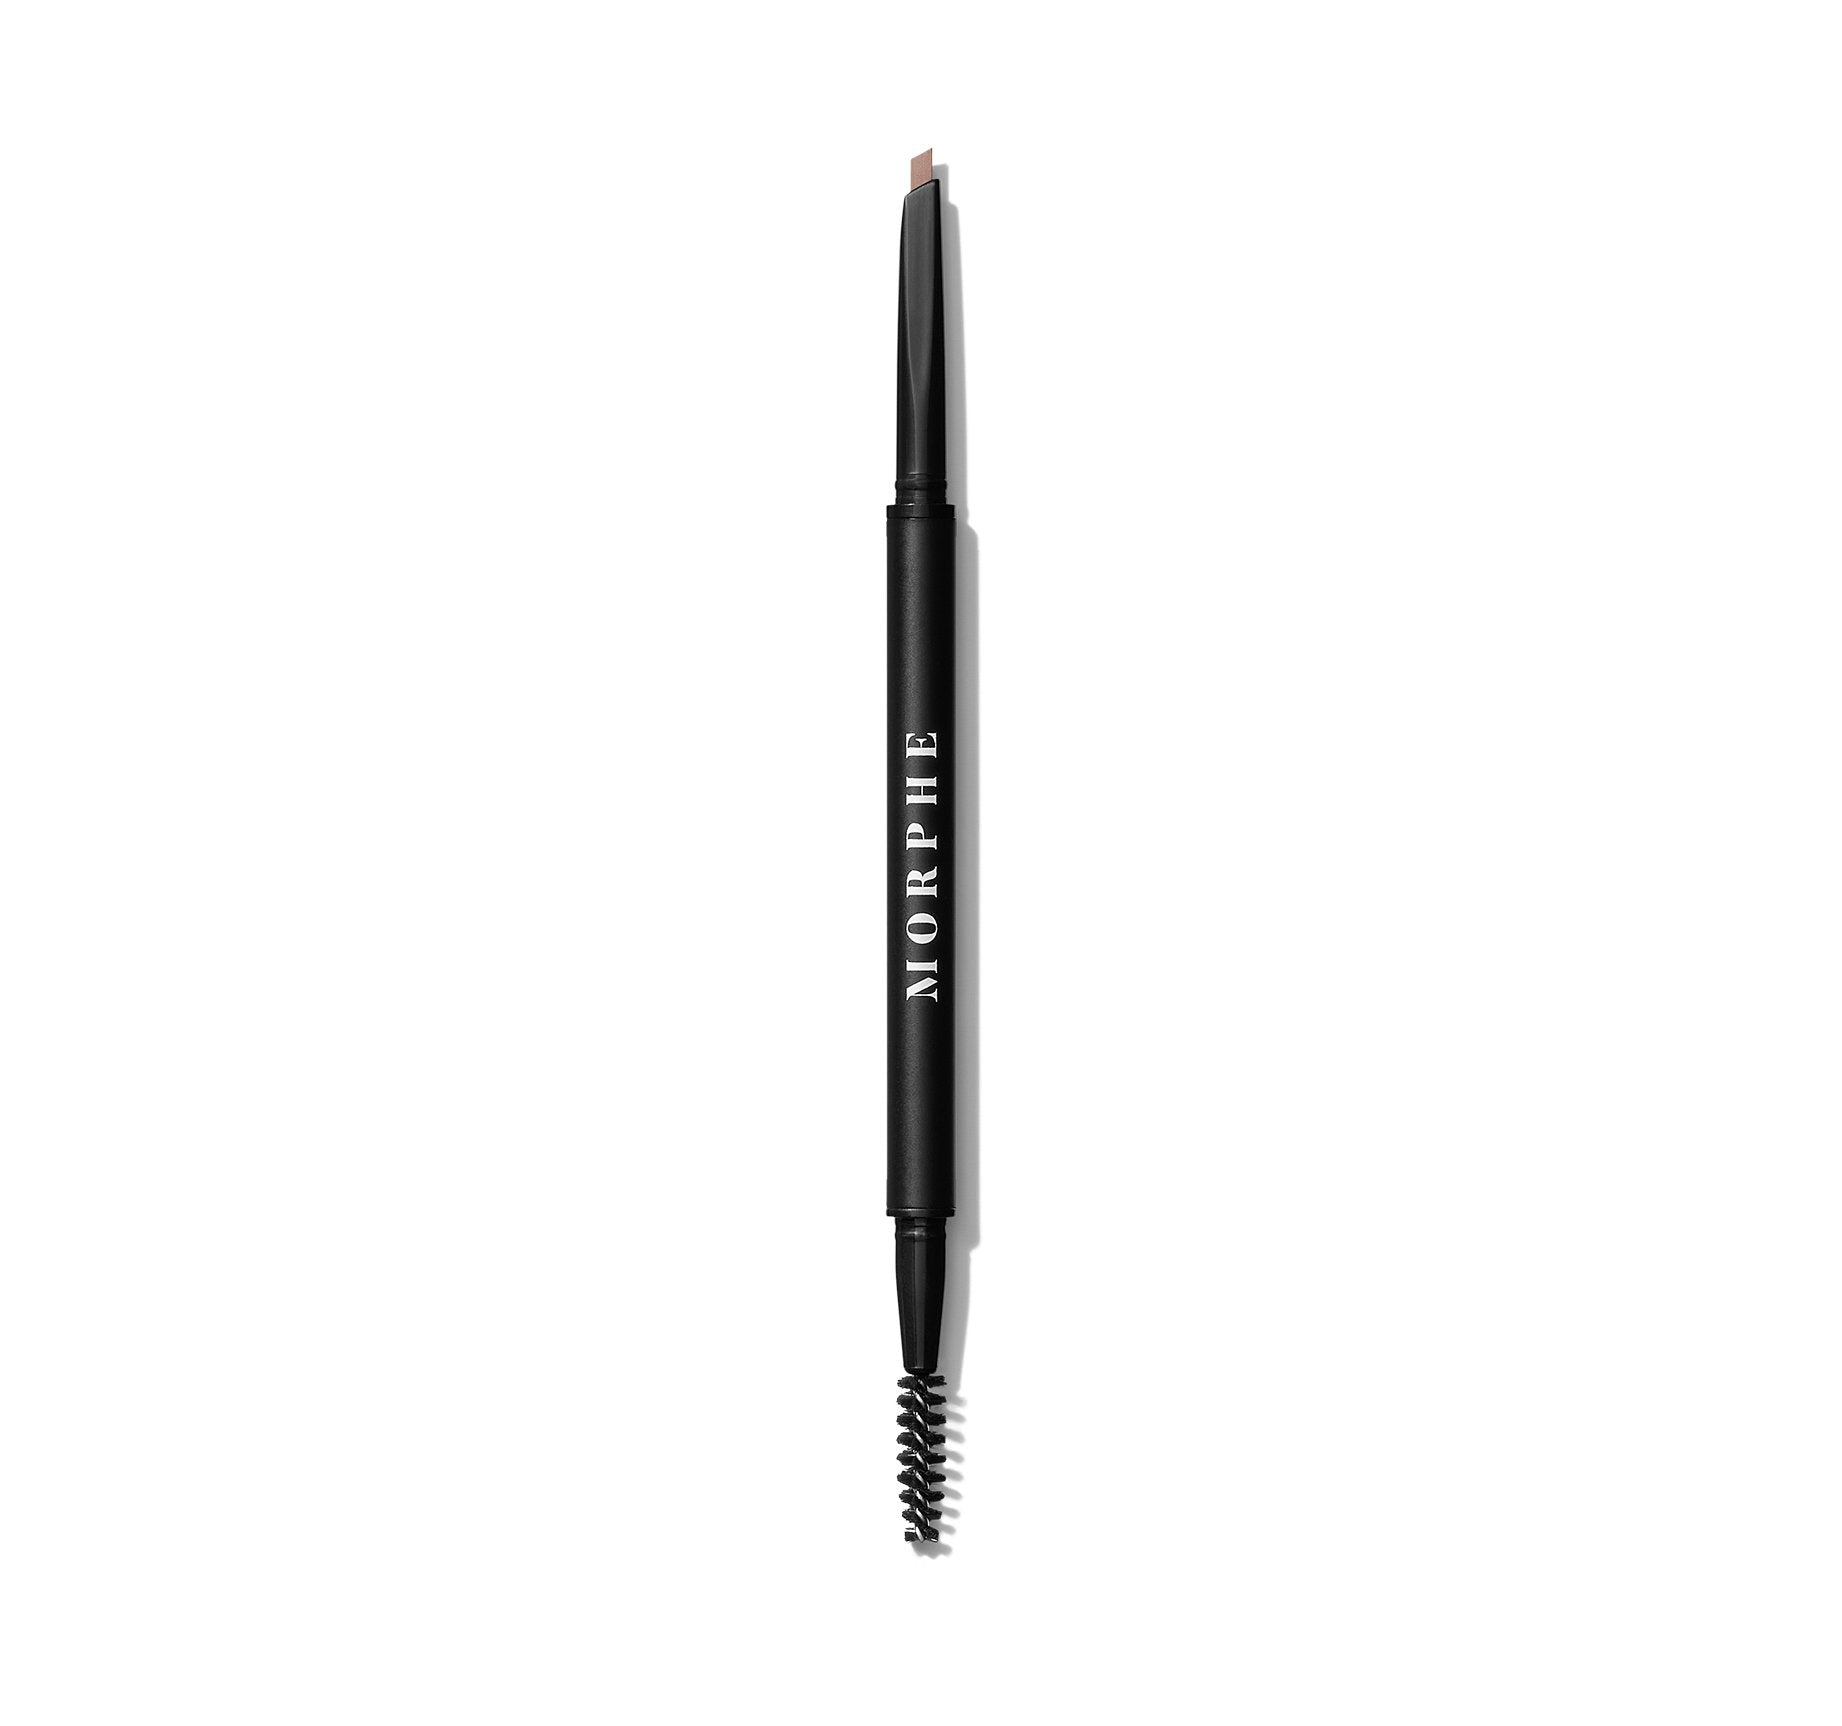 Definer Dual-Ended Brow Pencil & Spoolie - Biscotti - Image 1